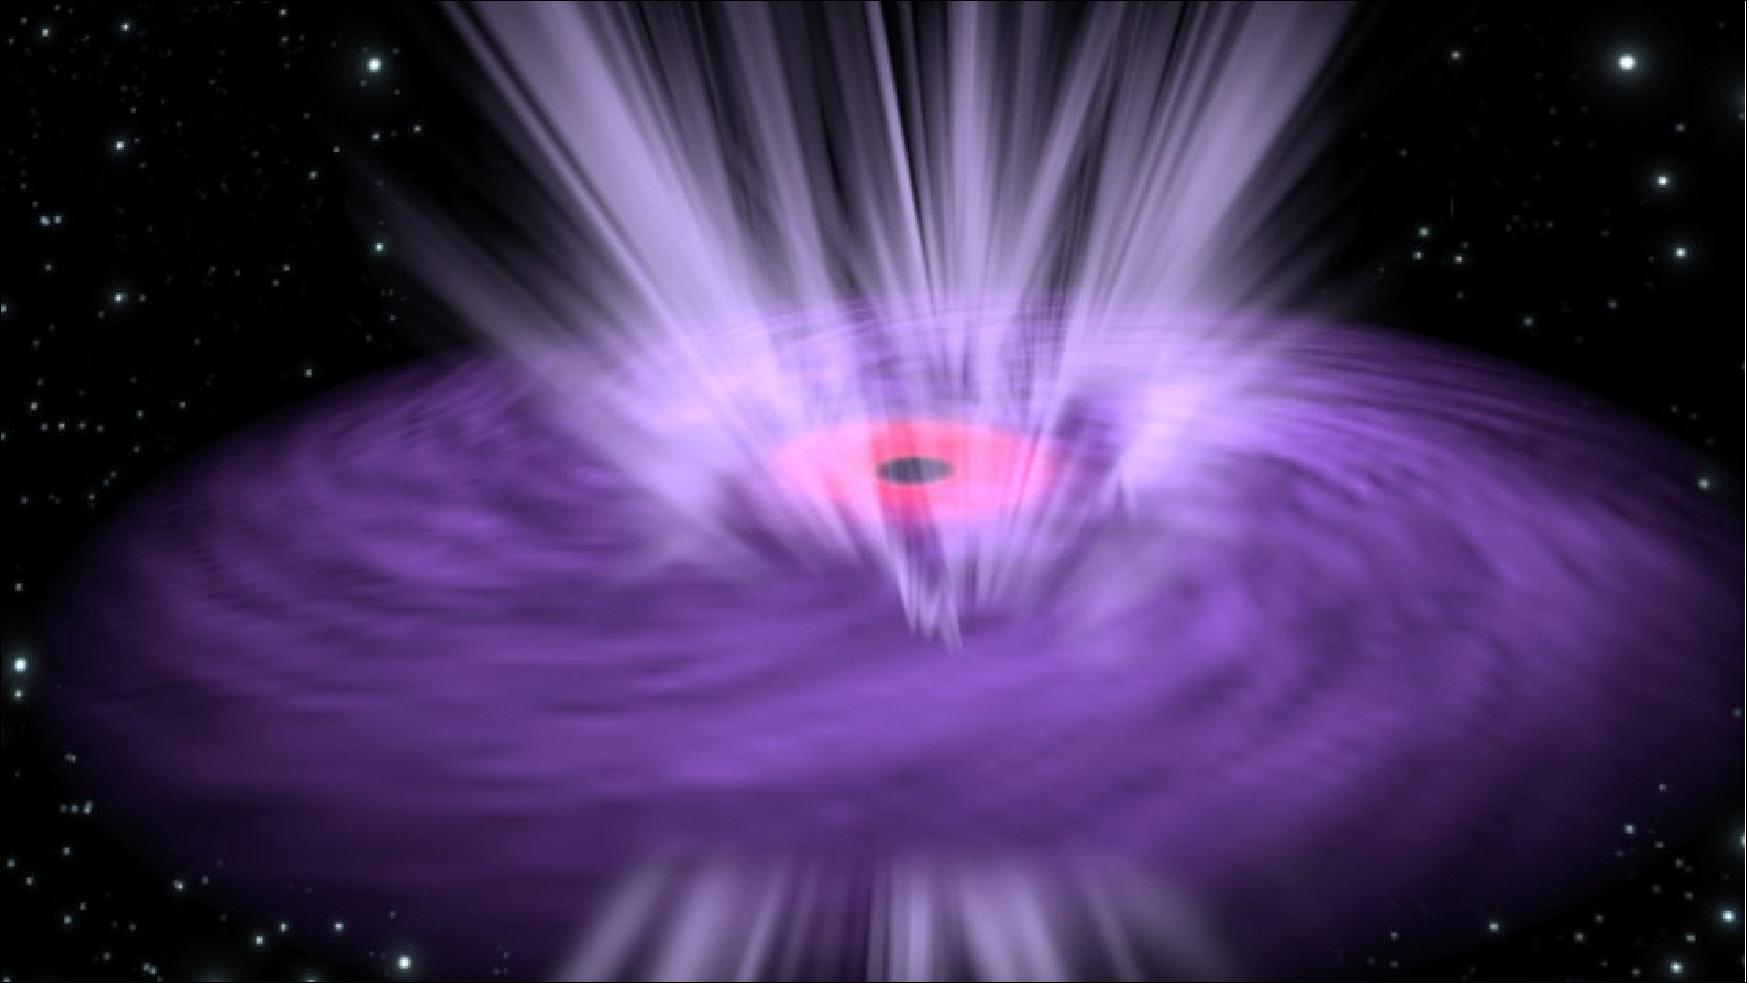 Figure 98: Artist impression illustrating a supermassive black hole with X-ray emission emanating from its inner region (pink) and ultrafast winds streaming from the surrounding disk (purple), image credit: ESA